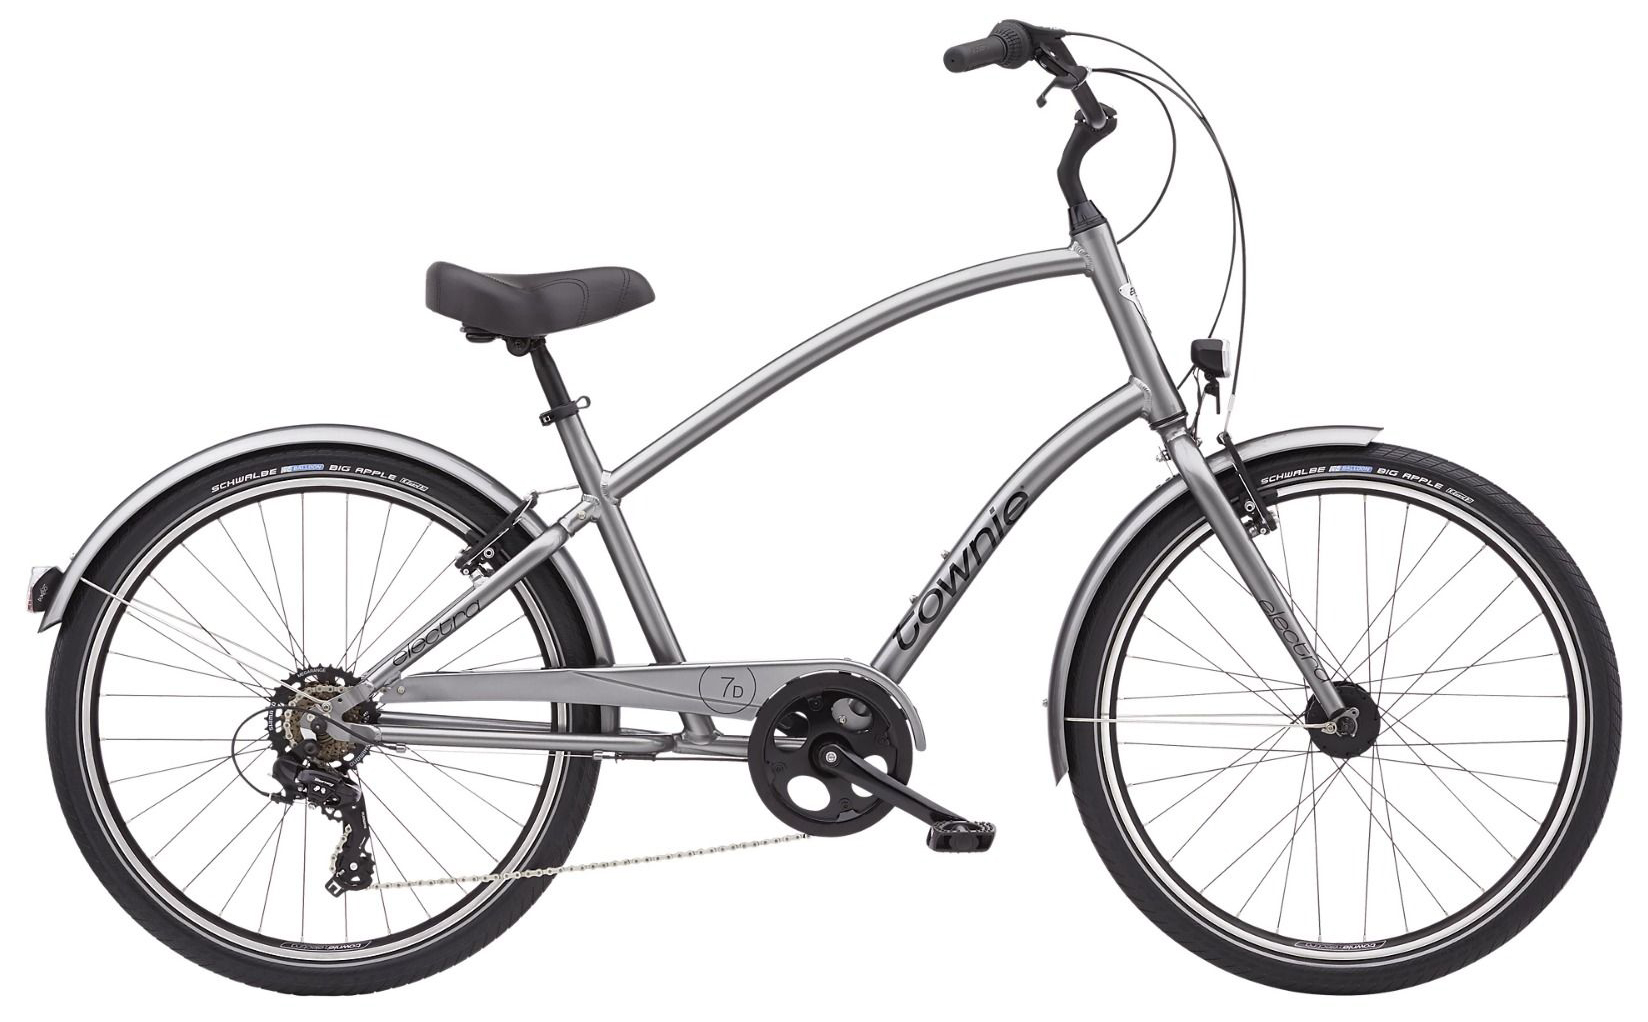  Велосипед Electra Townie 7D EQ Step Over (2021) 2021